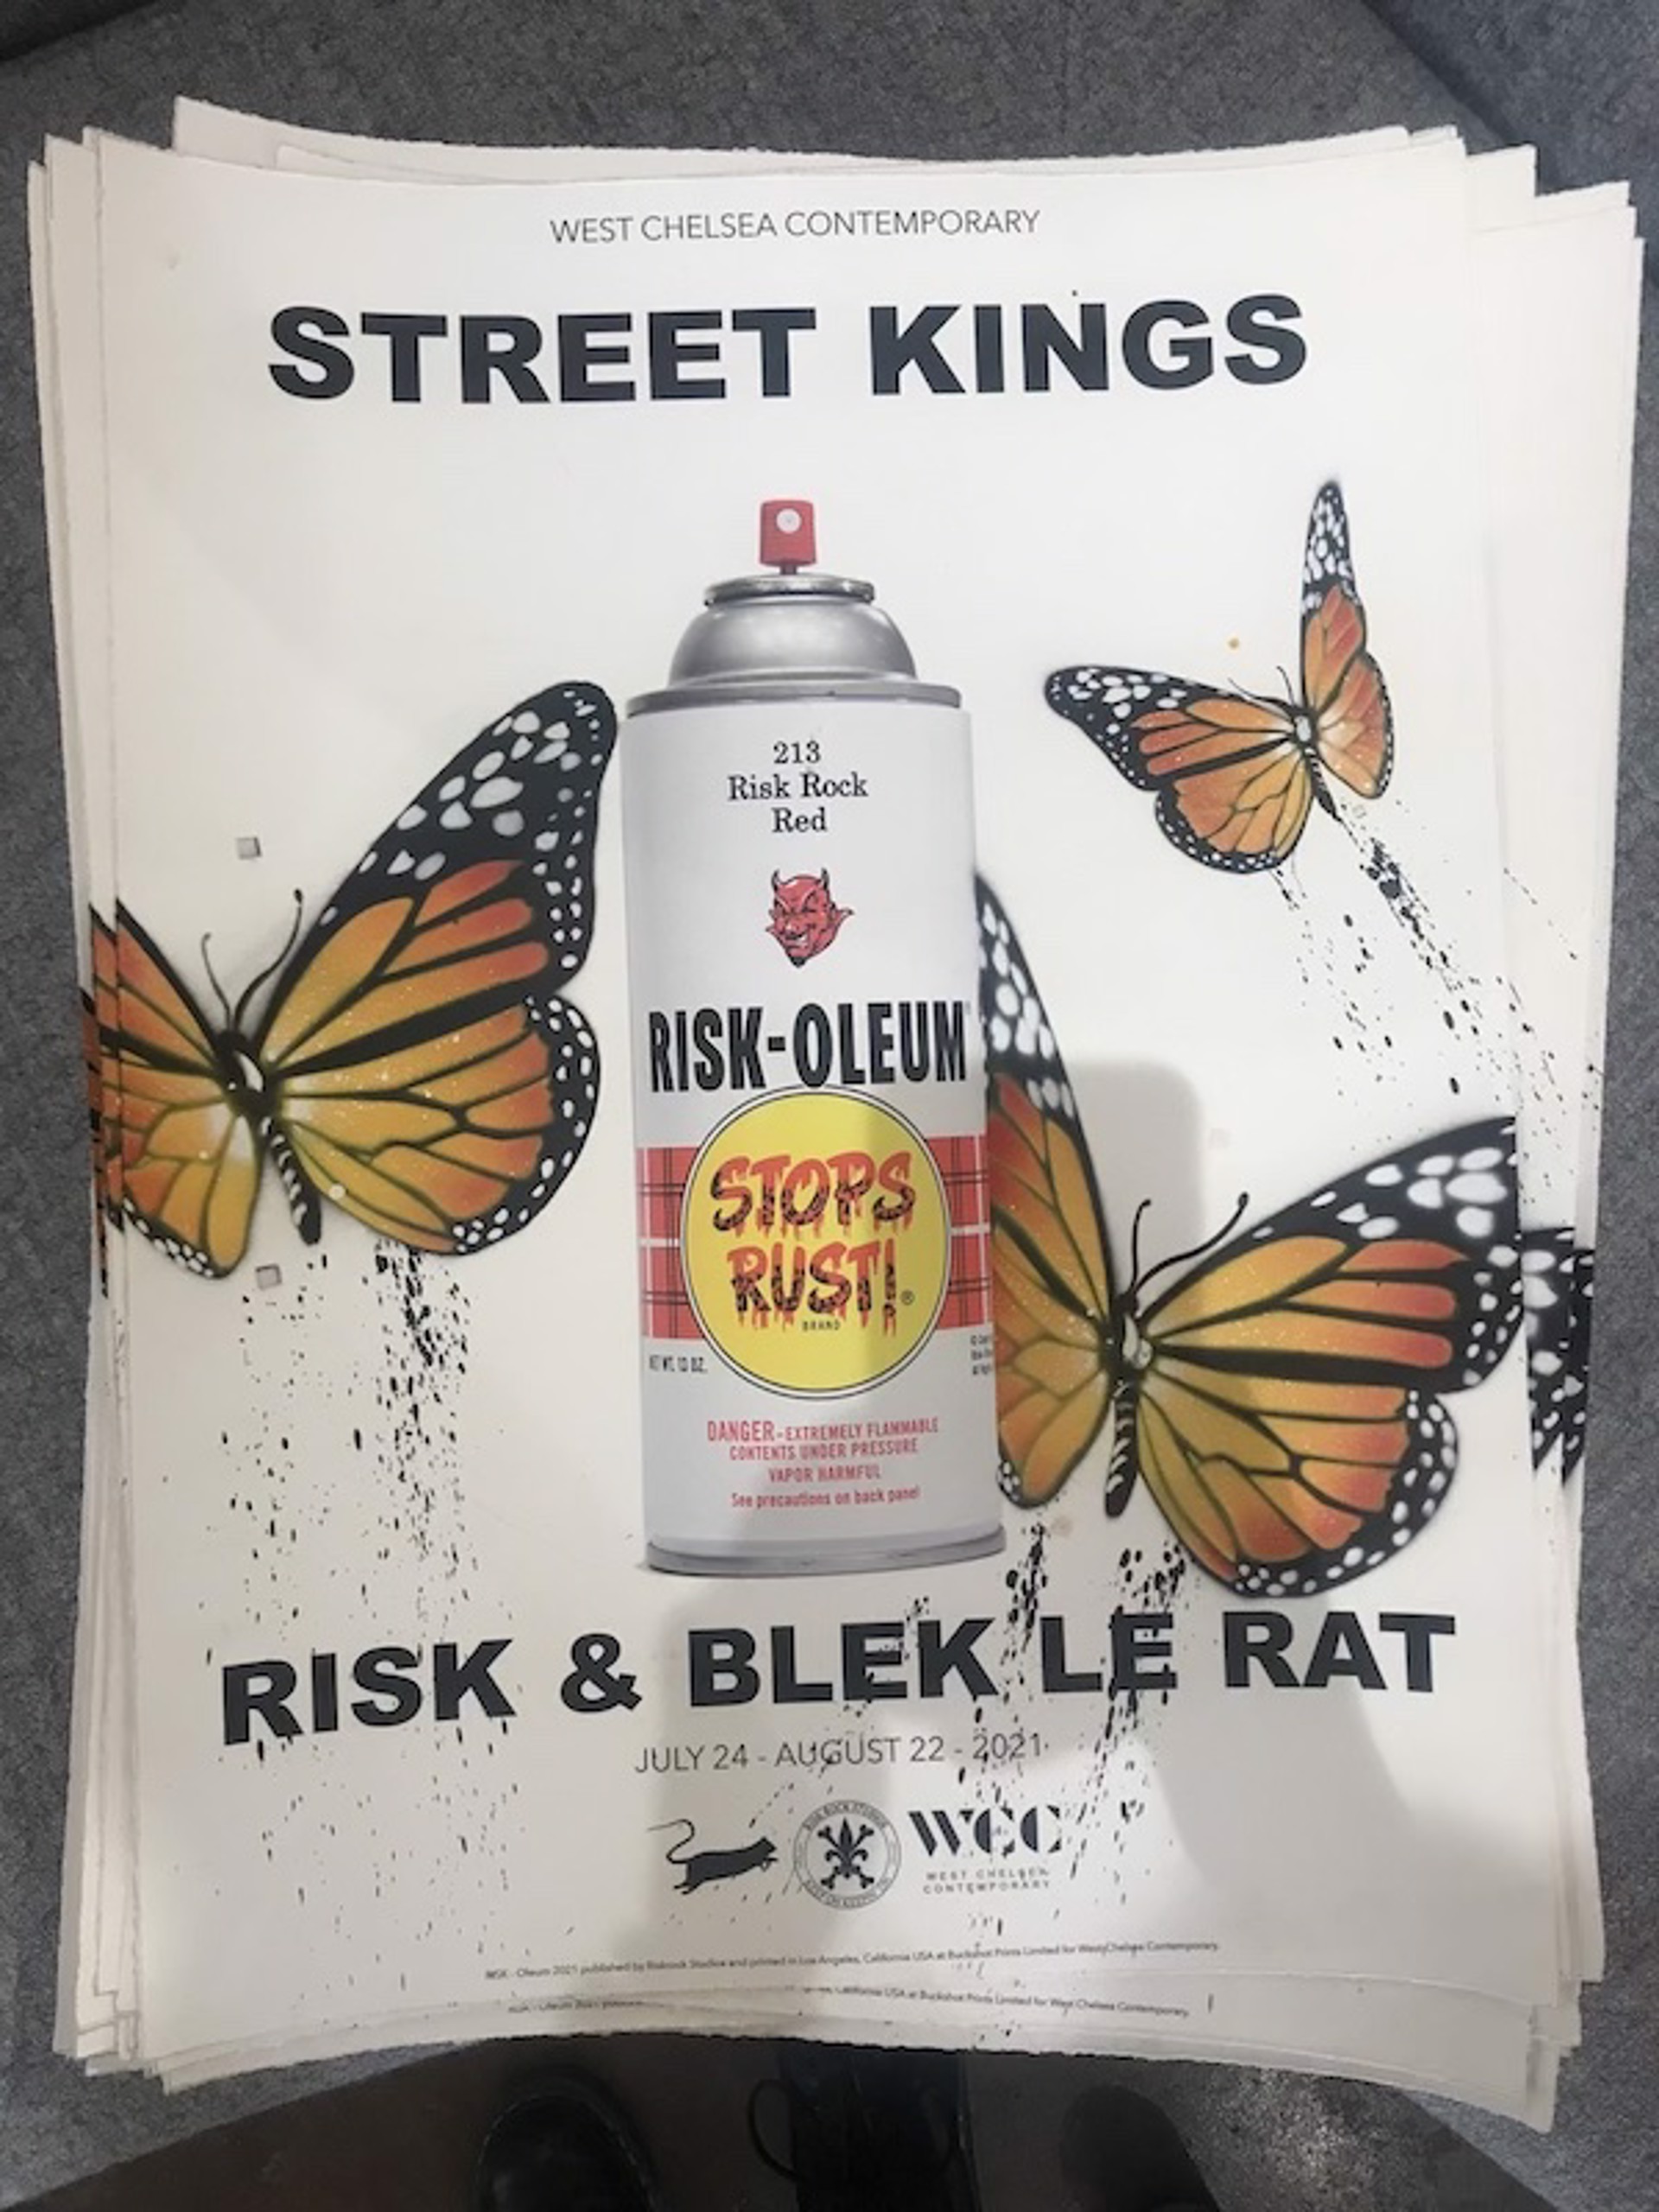 Street Kings Show Print (18/50) by Risk